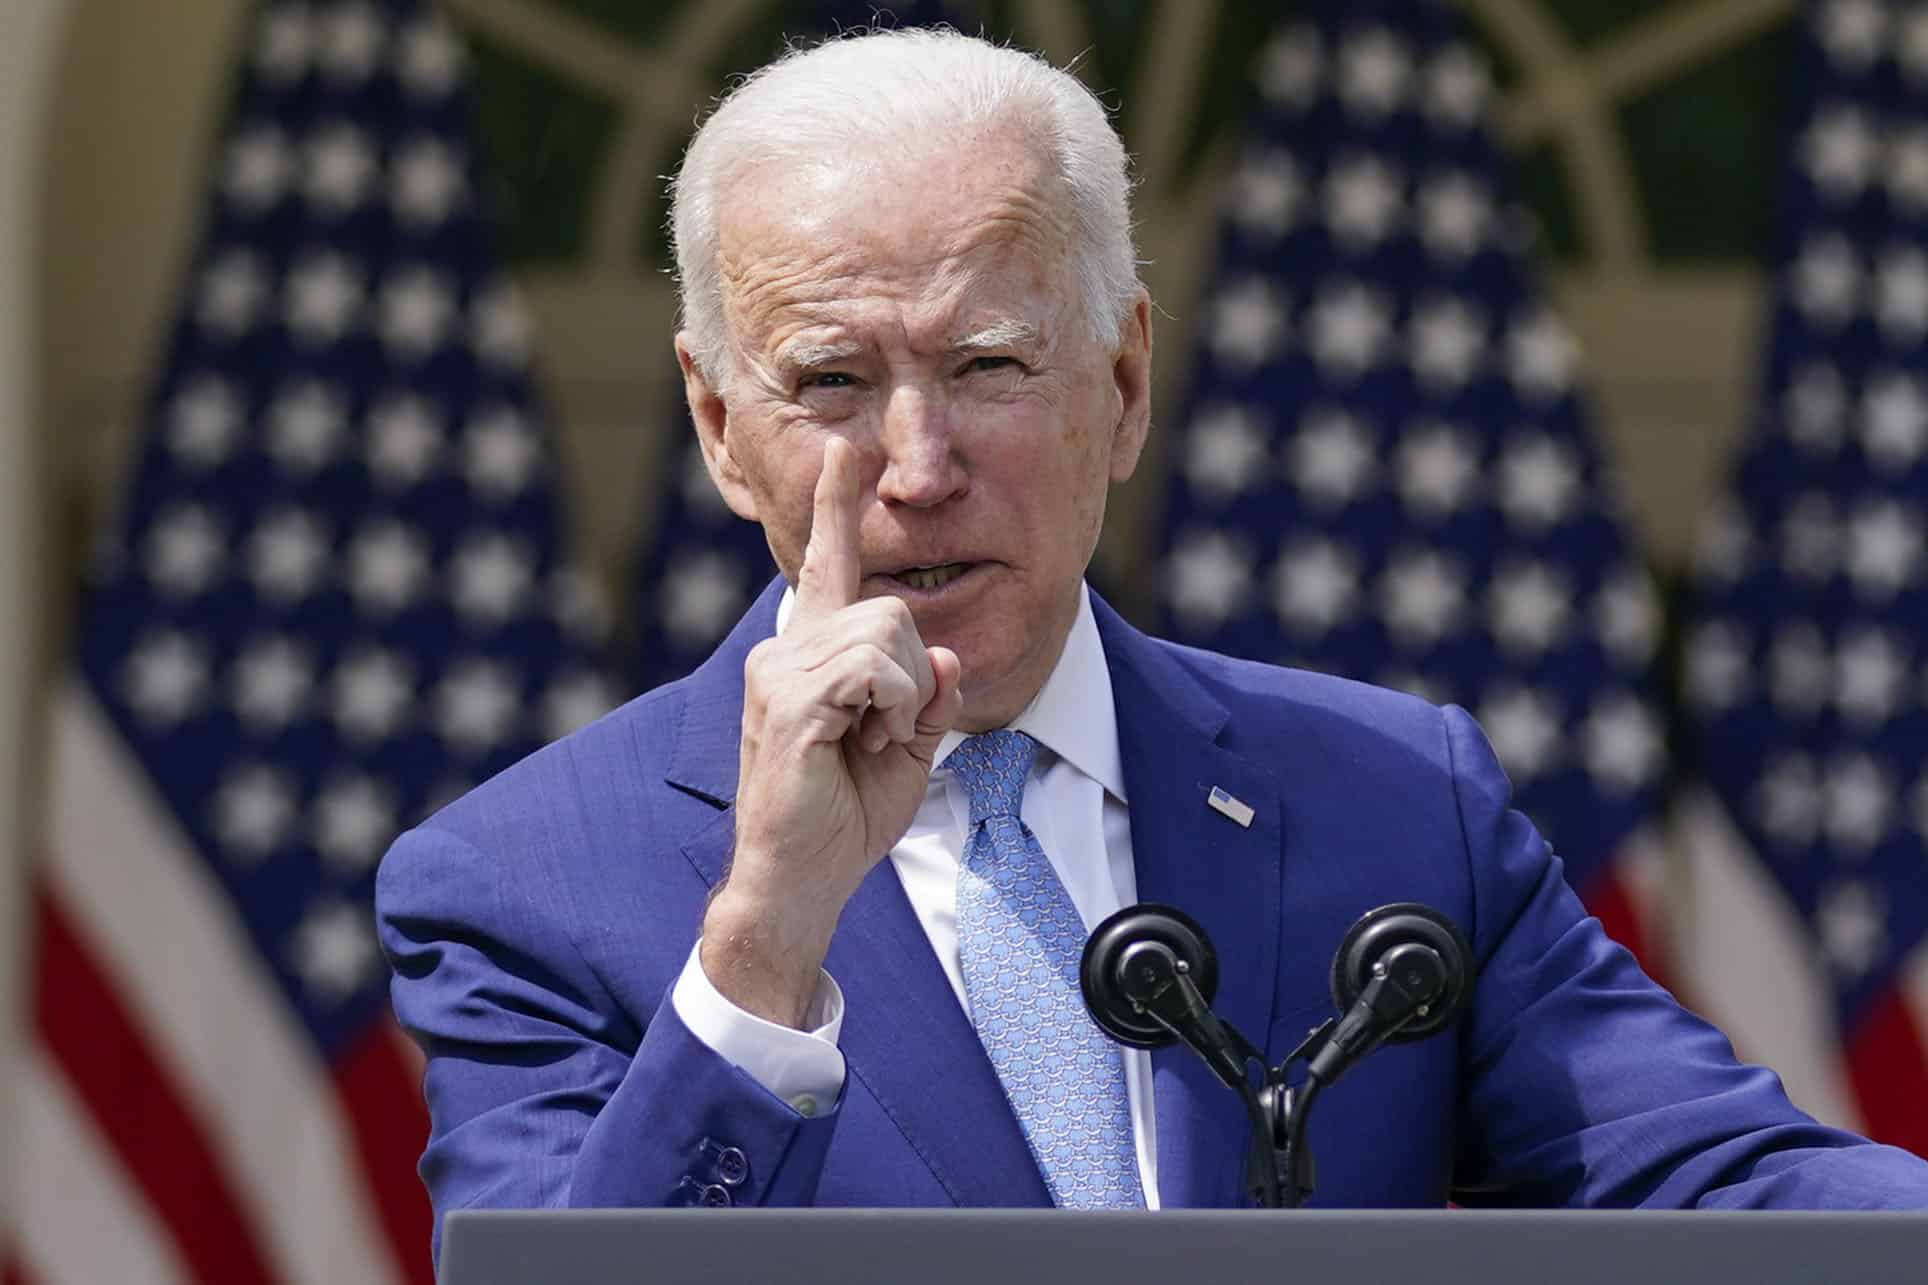 Human cost of a Russian invasion of Ukraine would be ‘immense’, Biden warns